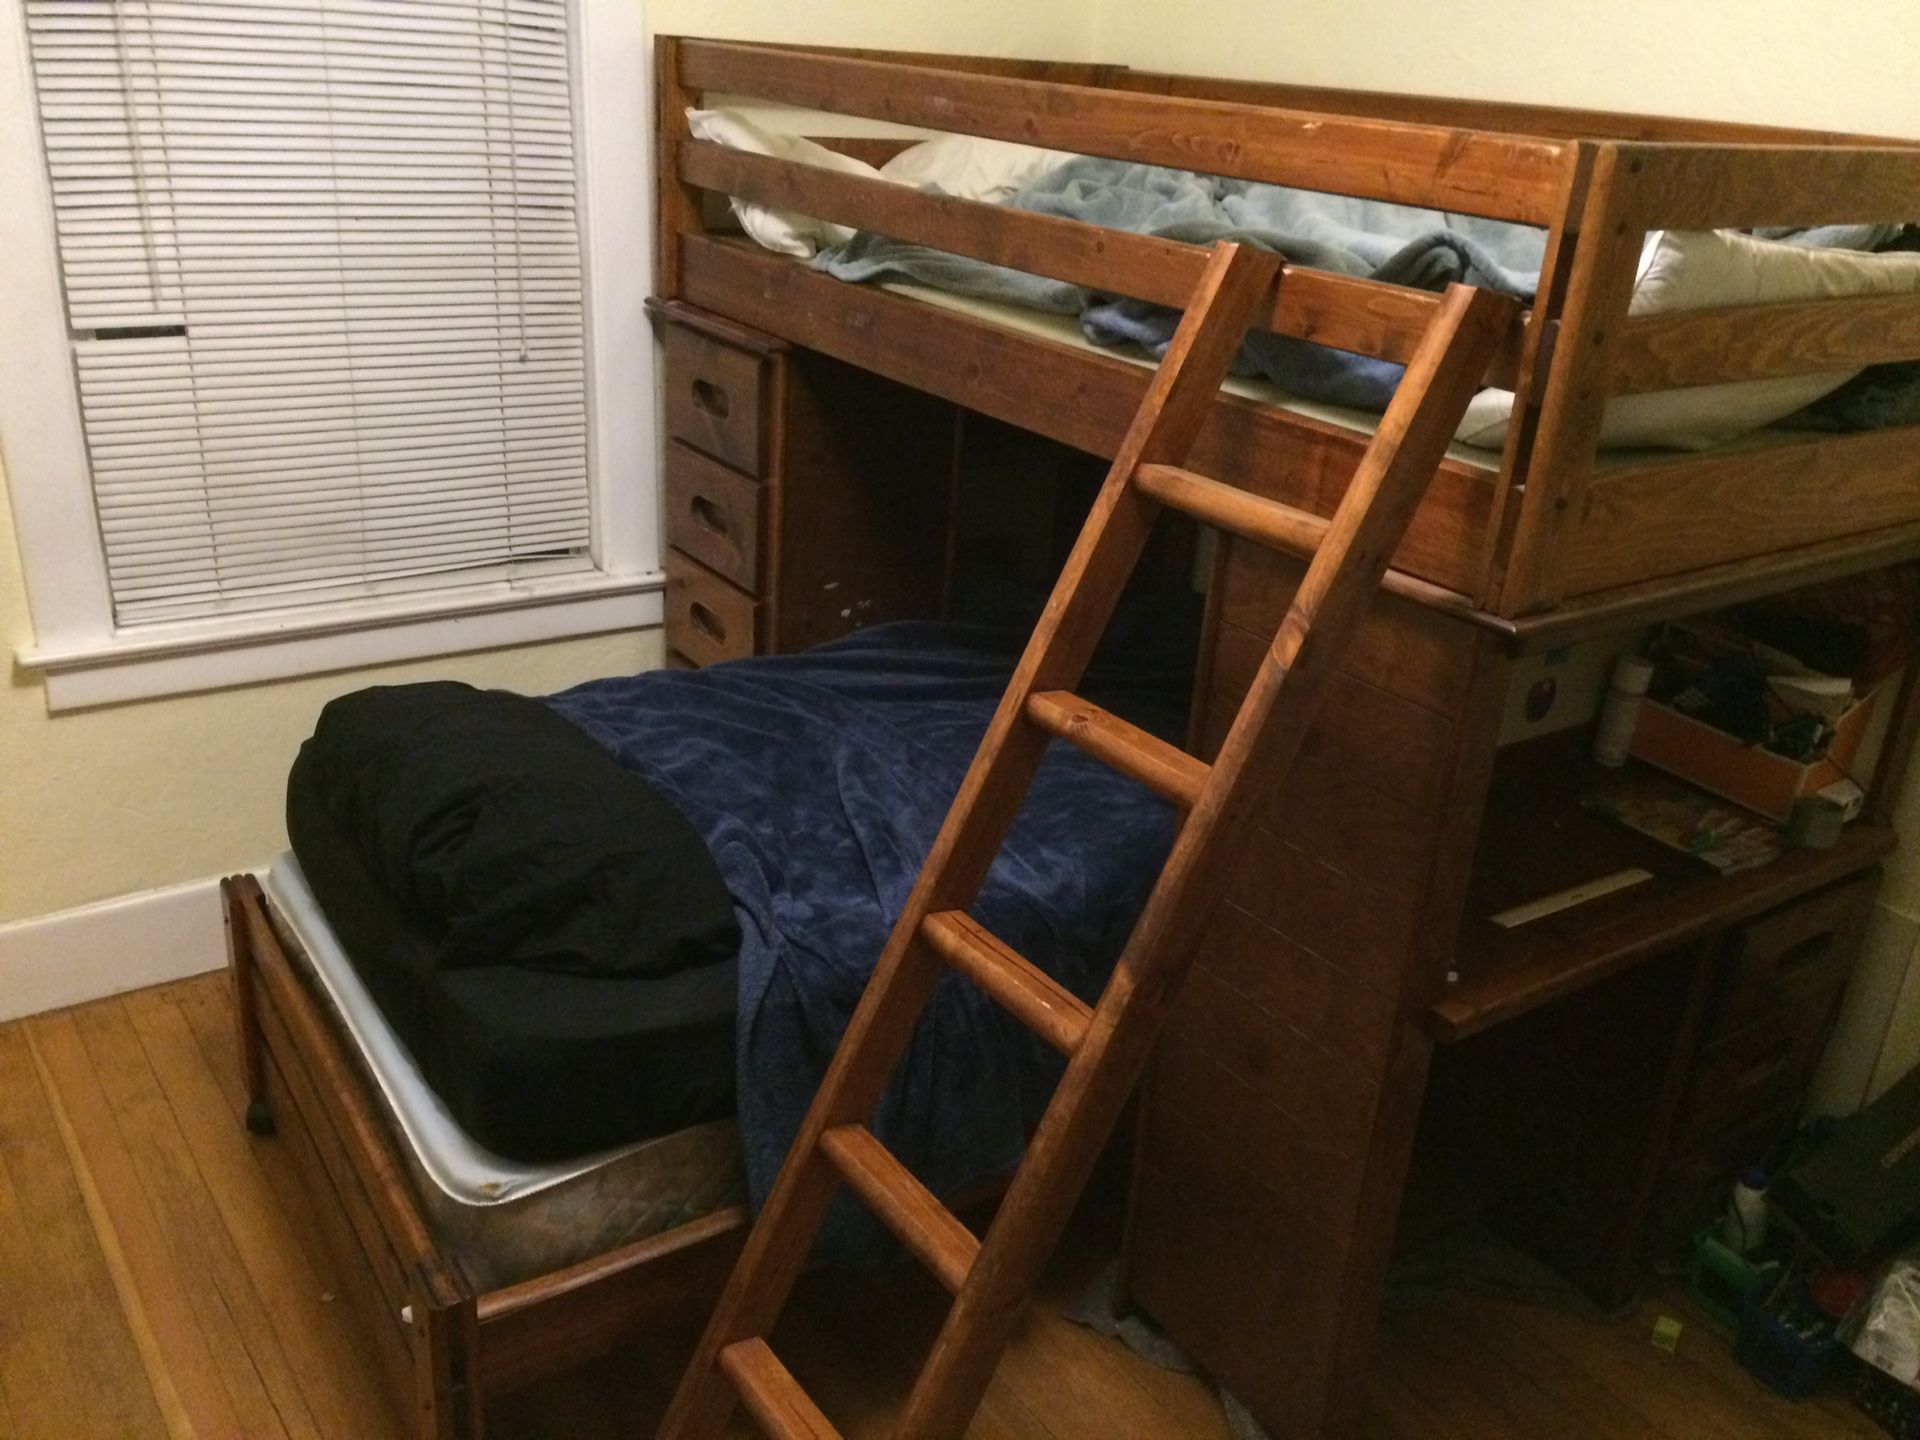 Solid wood bunk bed, moving lower bunk, with shelf, ladder, side drawers and desk